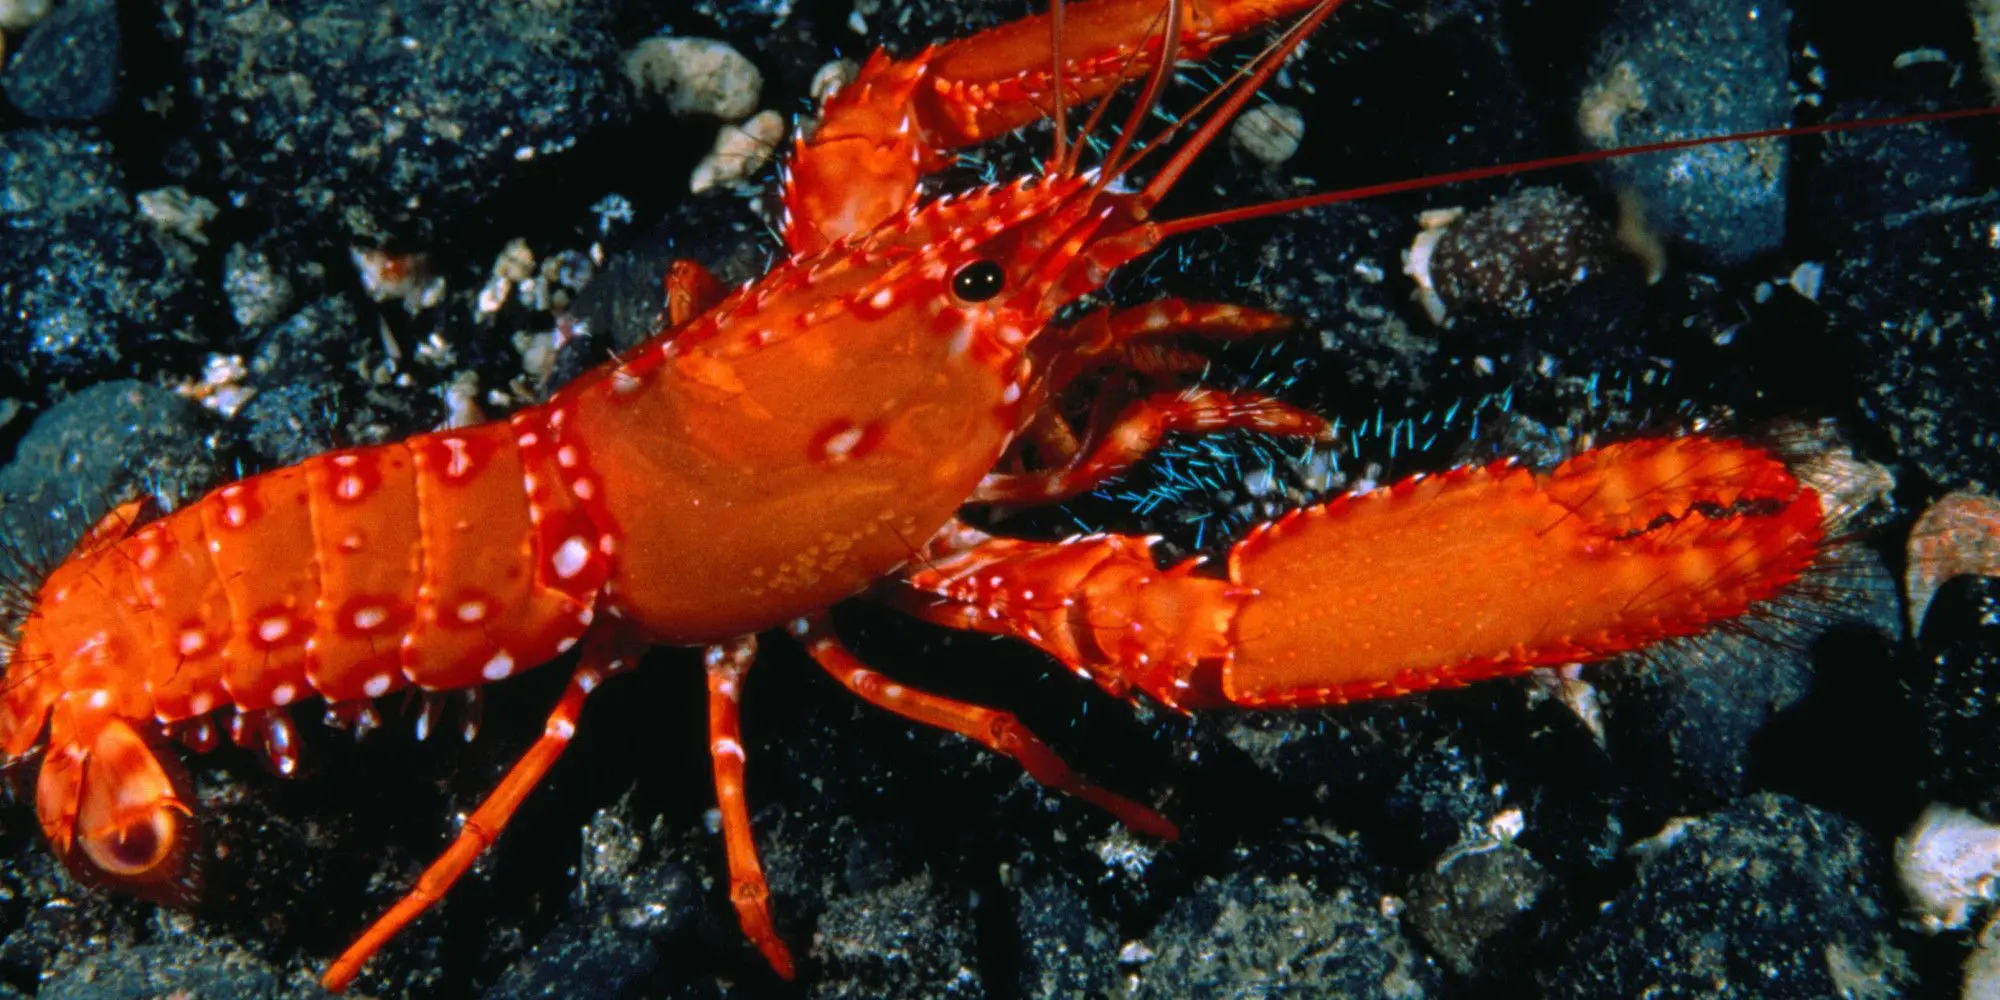 A lobster crawling on the sea floor.